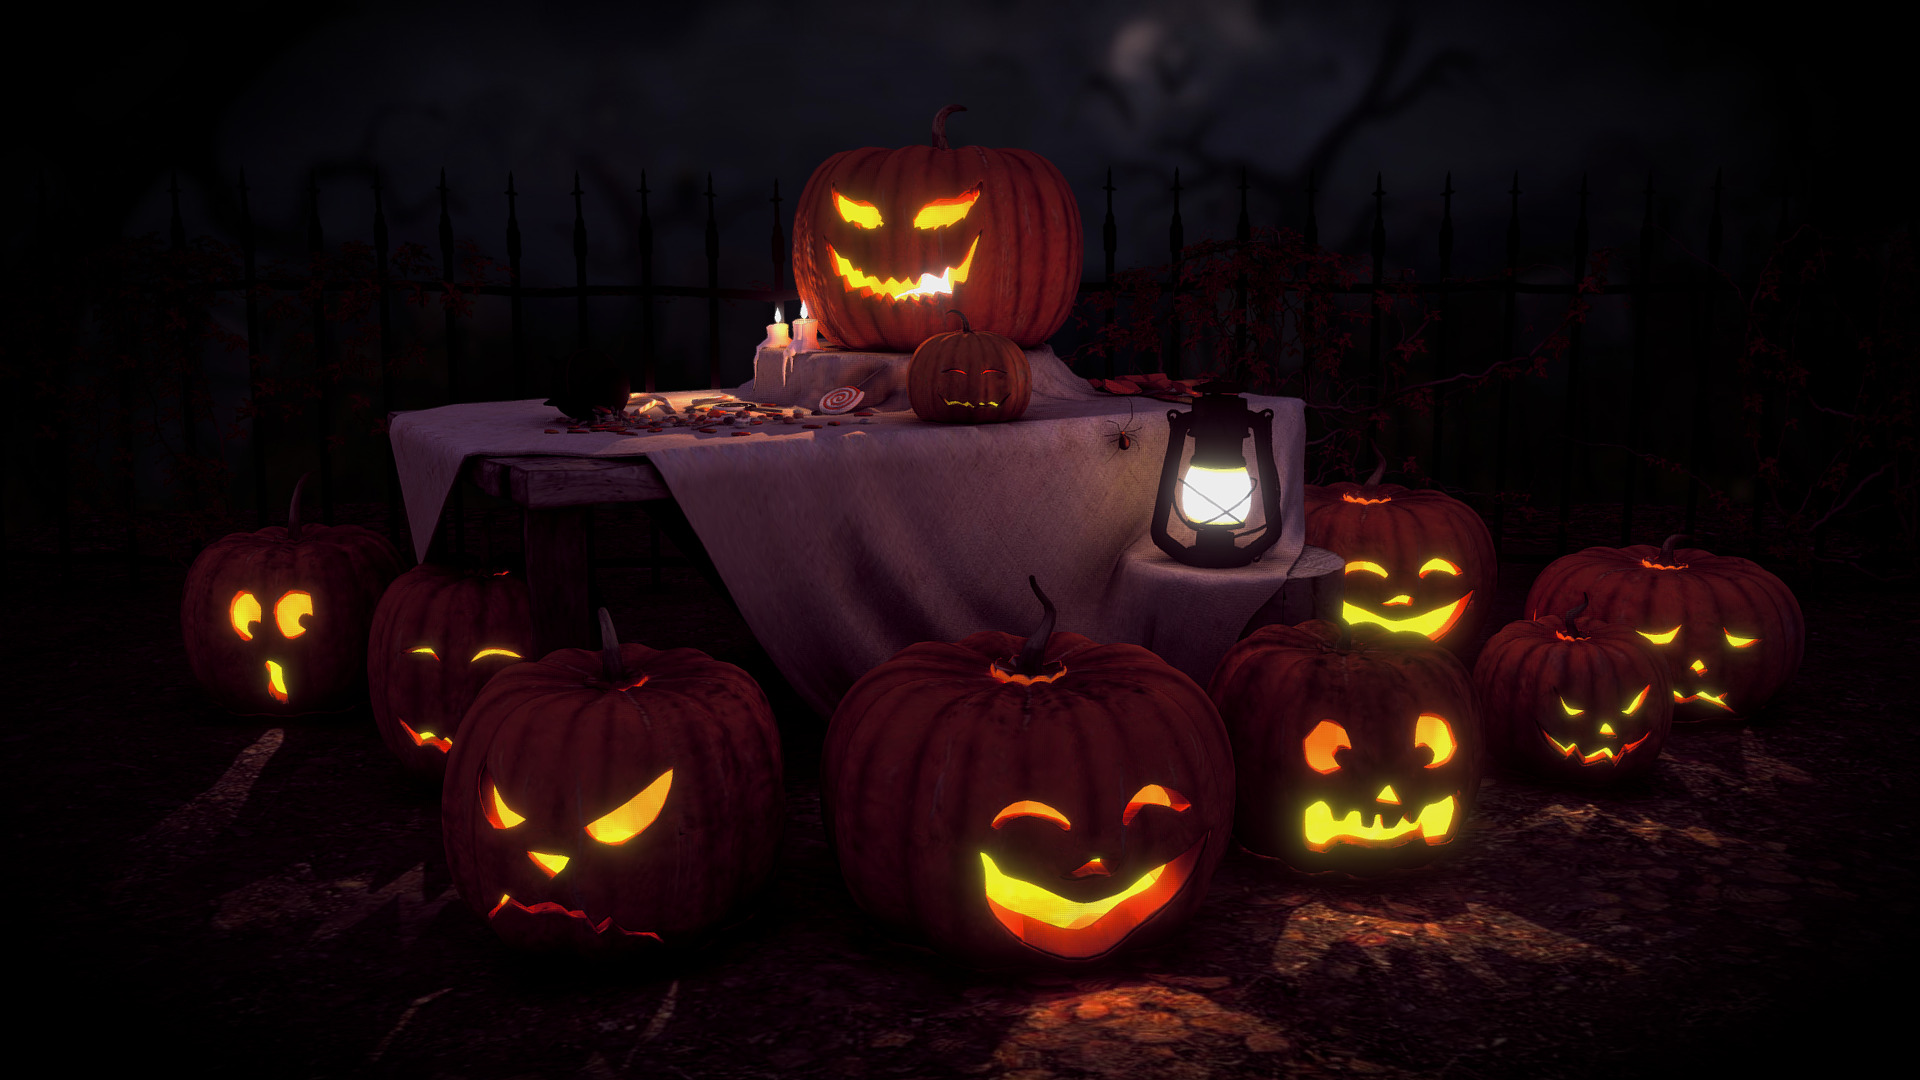 Some pumpkins and candies I made for Halloween. I just thought they deserve more luv ! So I took the time to upload them on Sketchfab and add some annotations about Halloween ! - Jack-O'-Lanterns party - 3D model by Thomas Veyrat (@veyratom) 3d model